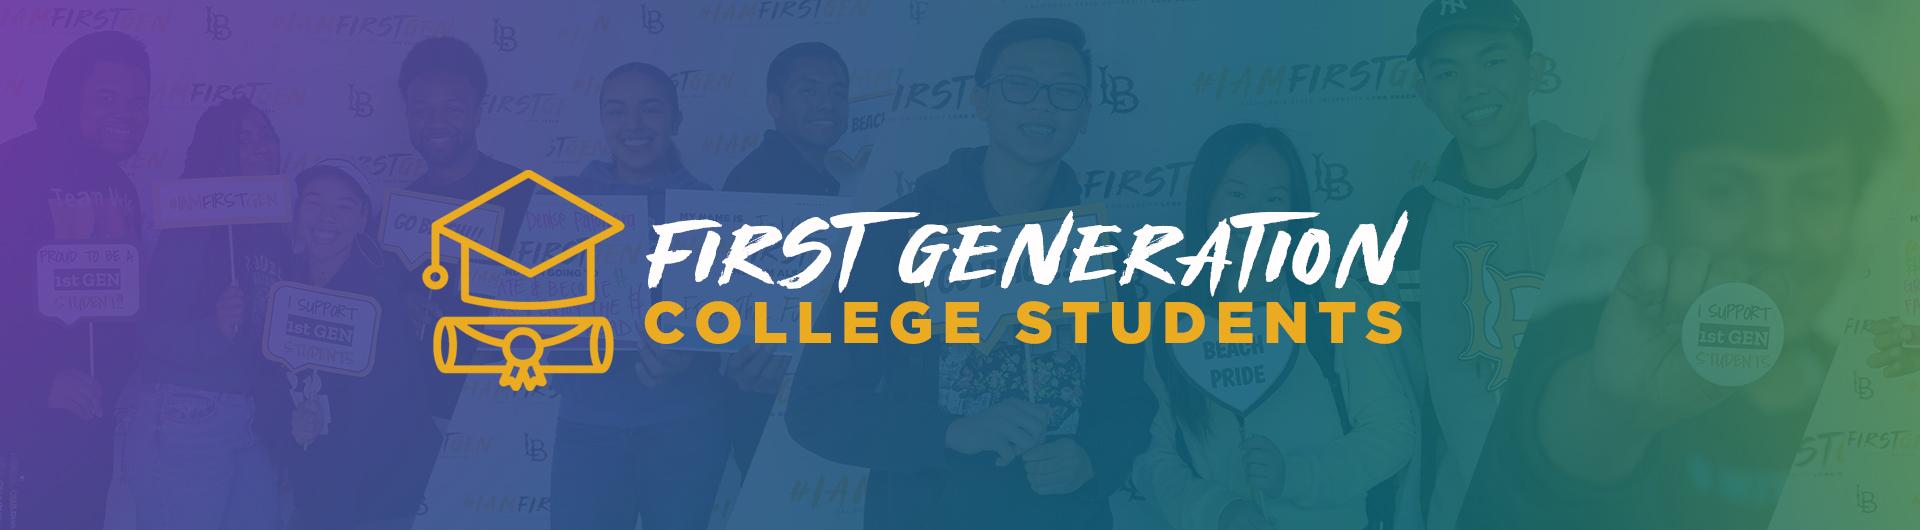 First Generation College Students